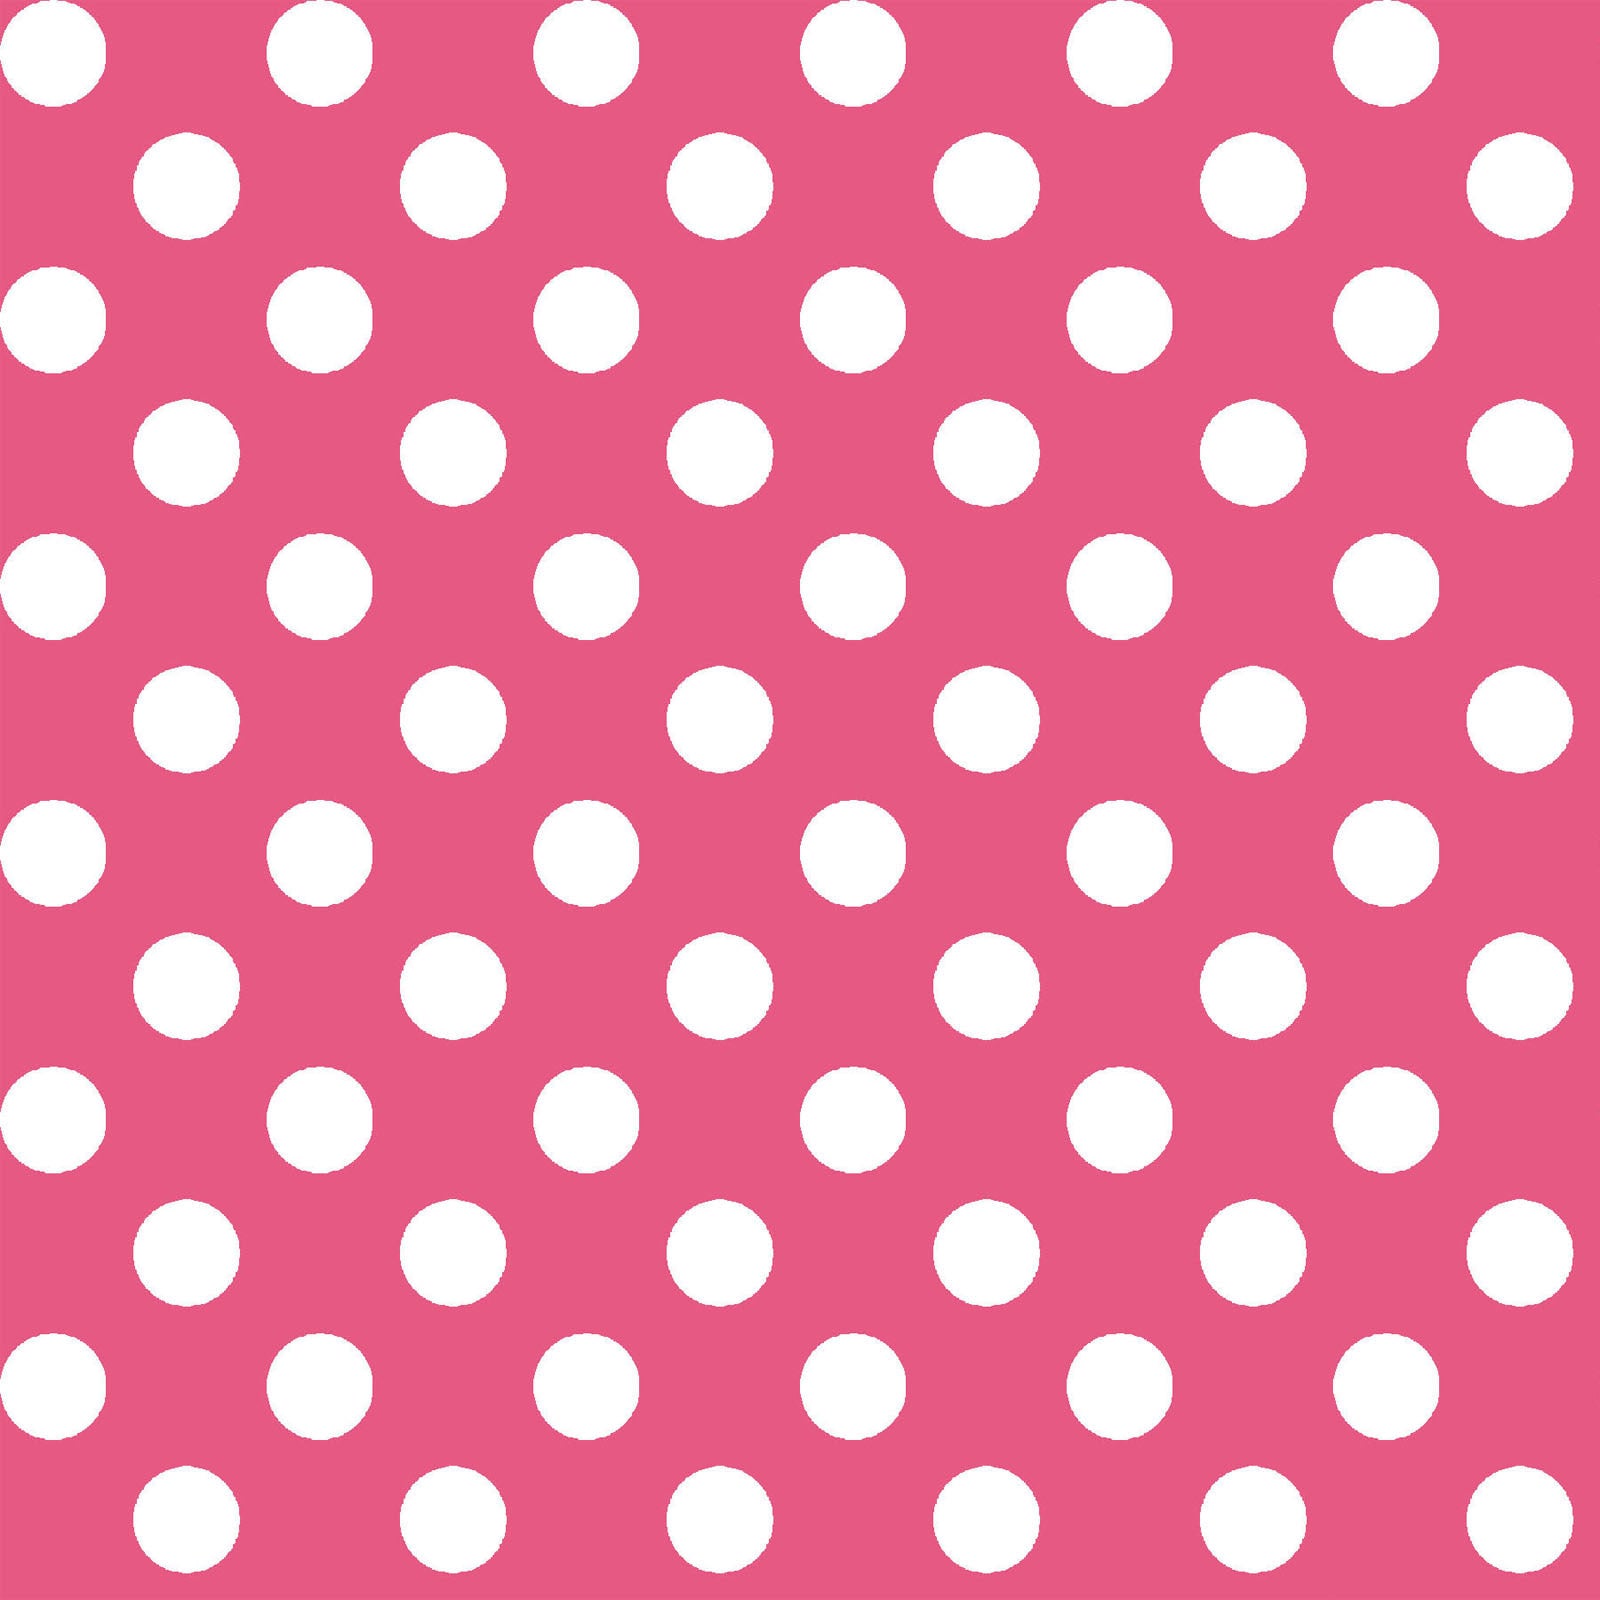 White on Pink Dots (MAS8216-P) is part of the Kimberbell Basics line designed by Kim Christopherson for Maywood Studio. This fabric features large white dots in a symmetrical pattern on an pink background.